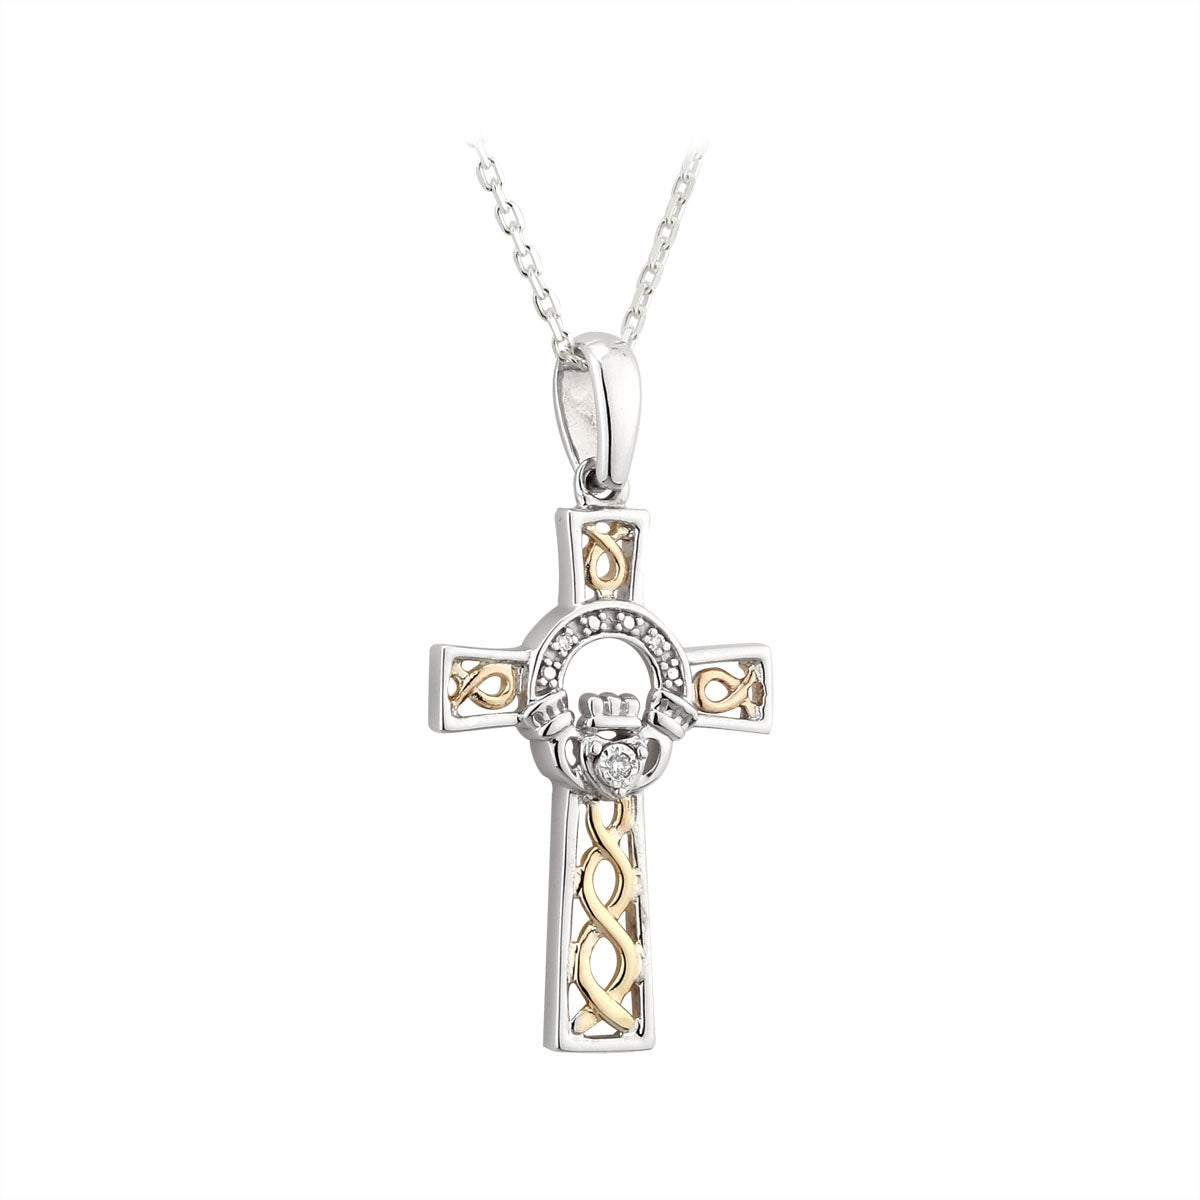 sterling silver and 10k gold diamond claddagh cross pendant s45785 from Solvar